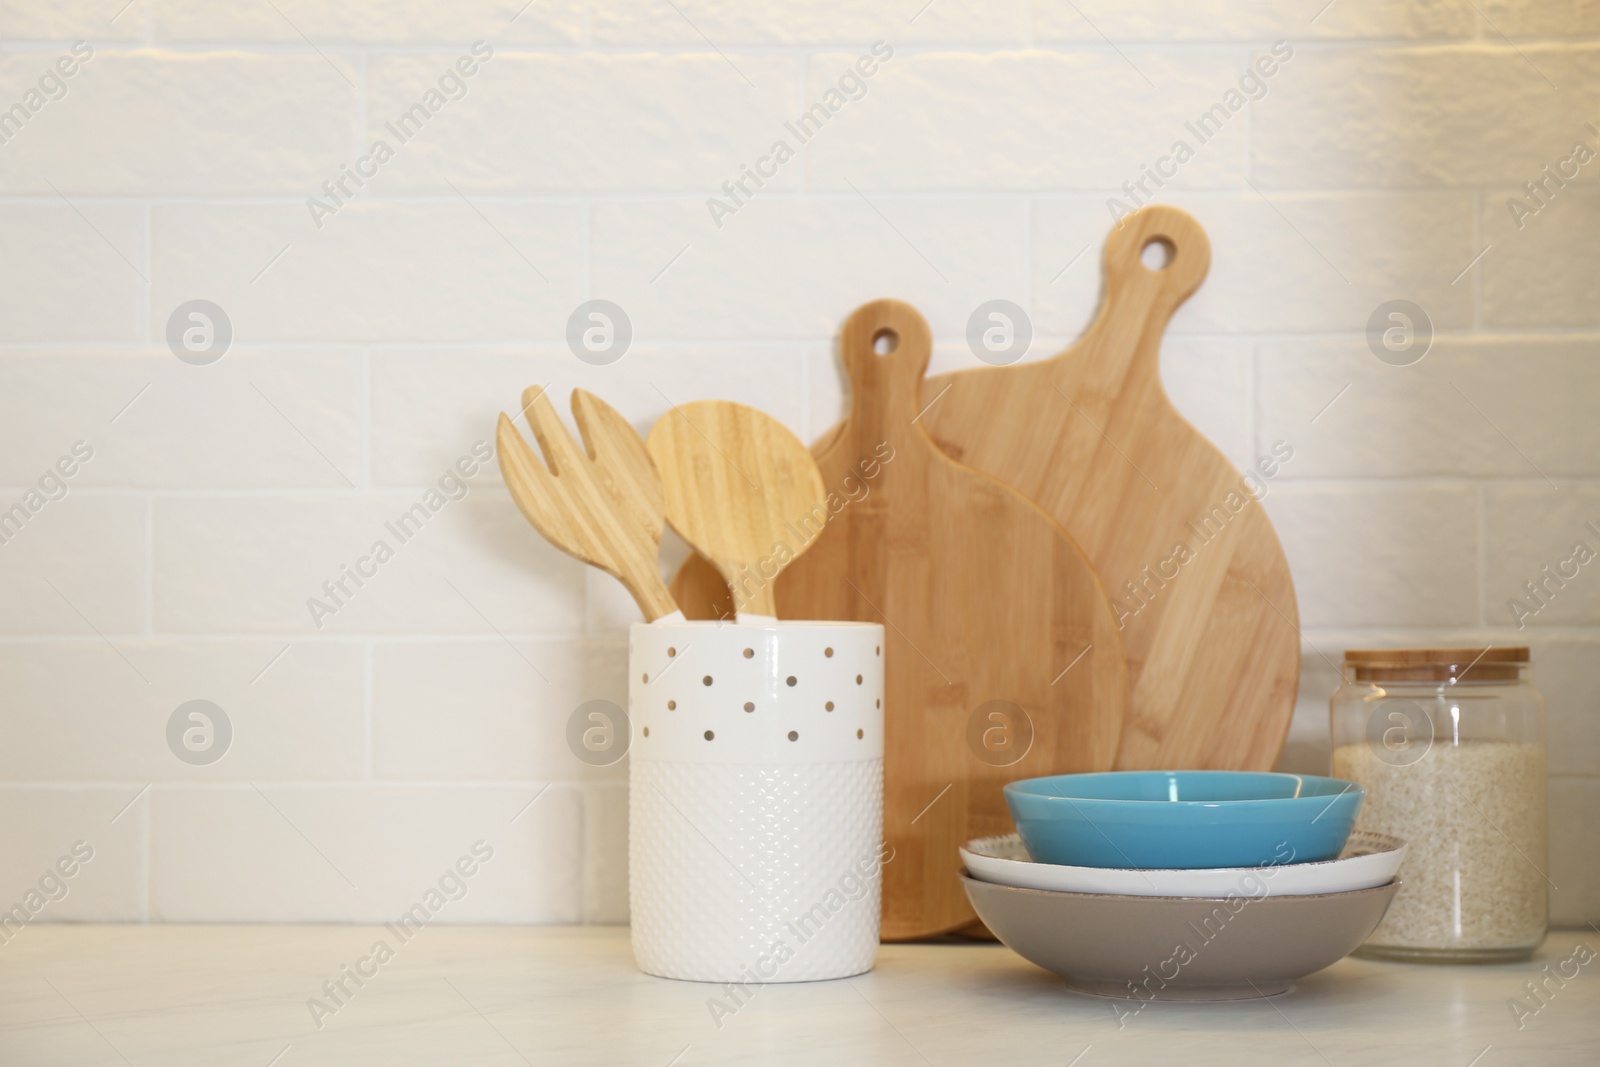 Photo of Wooden boards and different kitchen items on countertop indoors